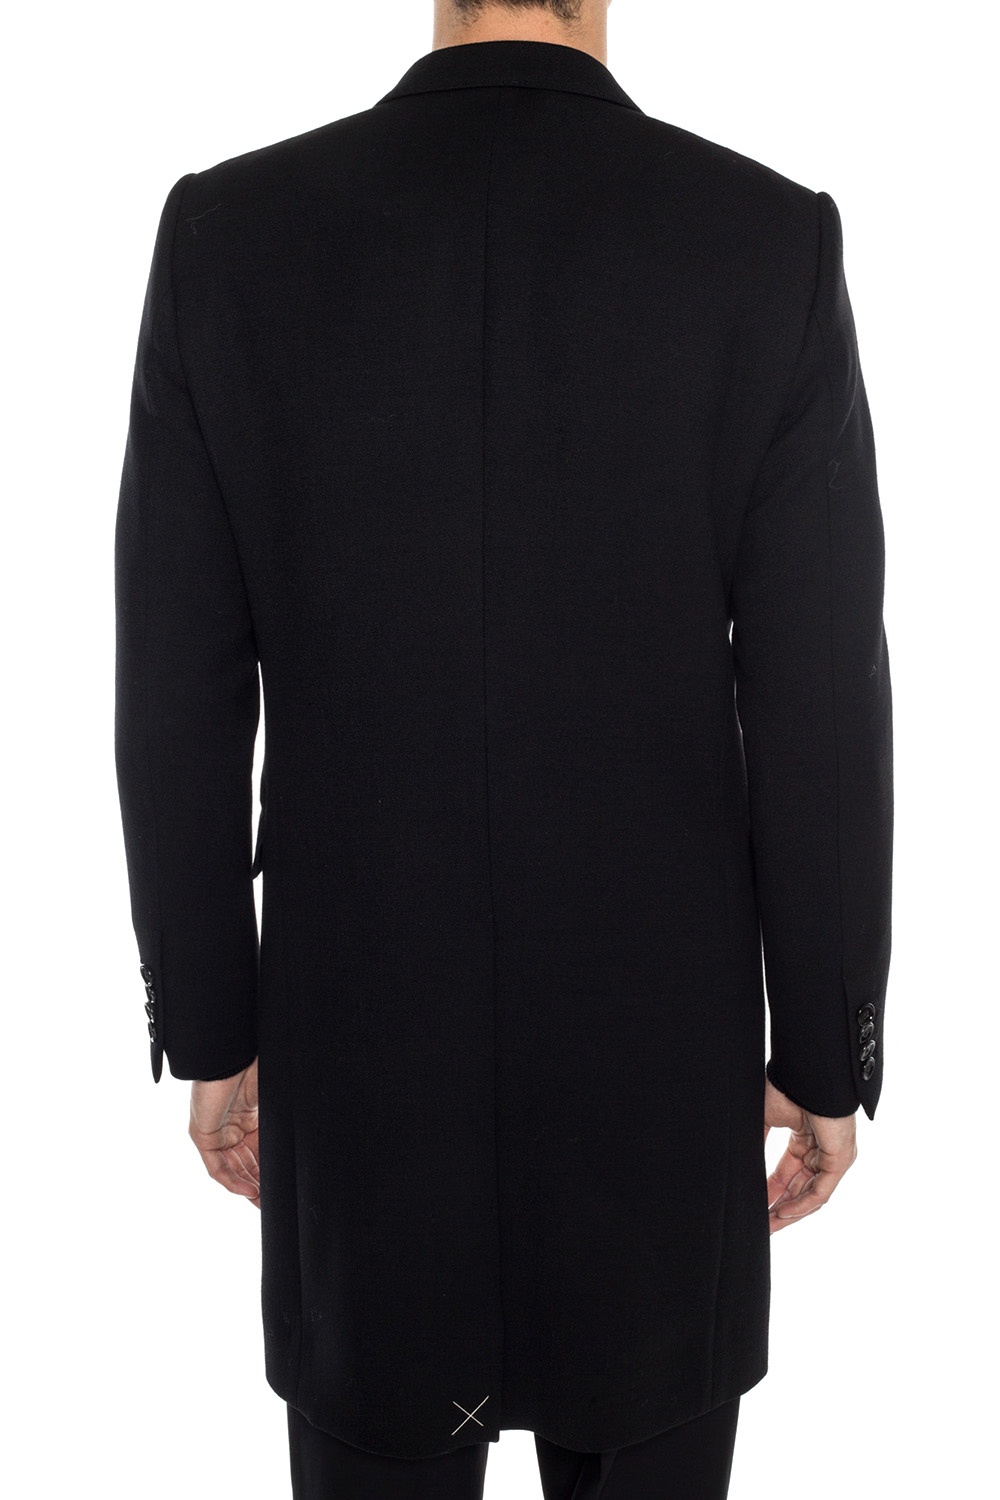 Dolce & Gabbana Coat with notched lapels